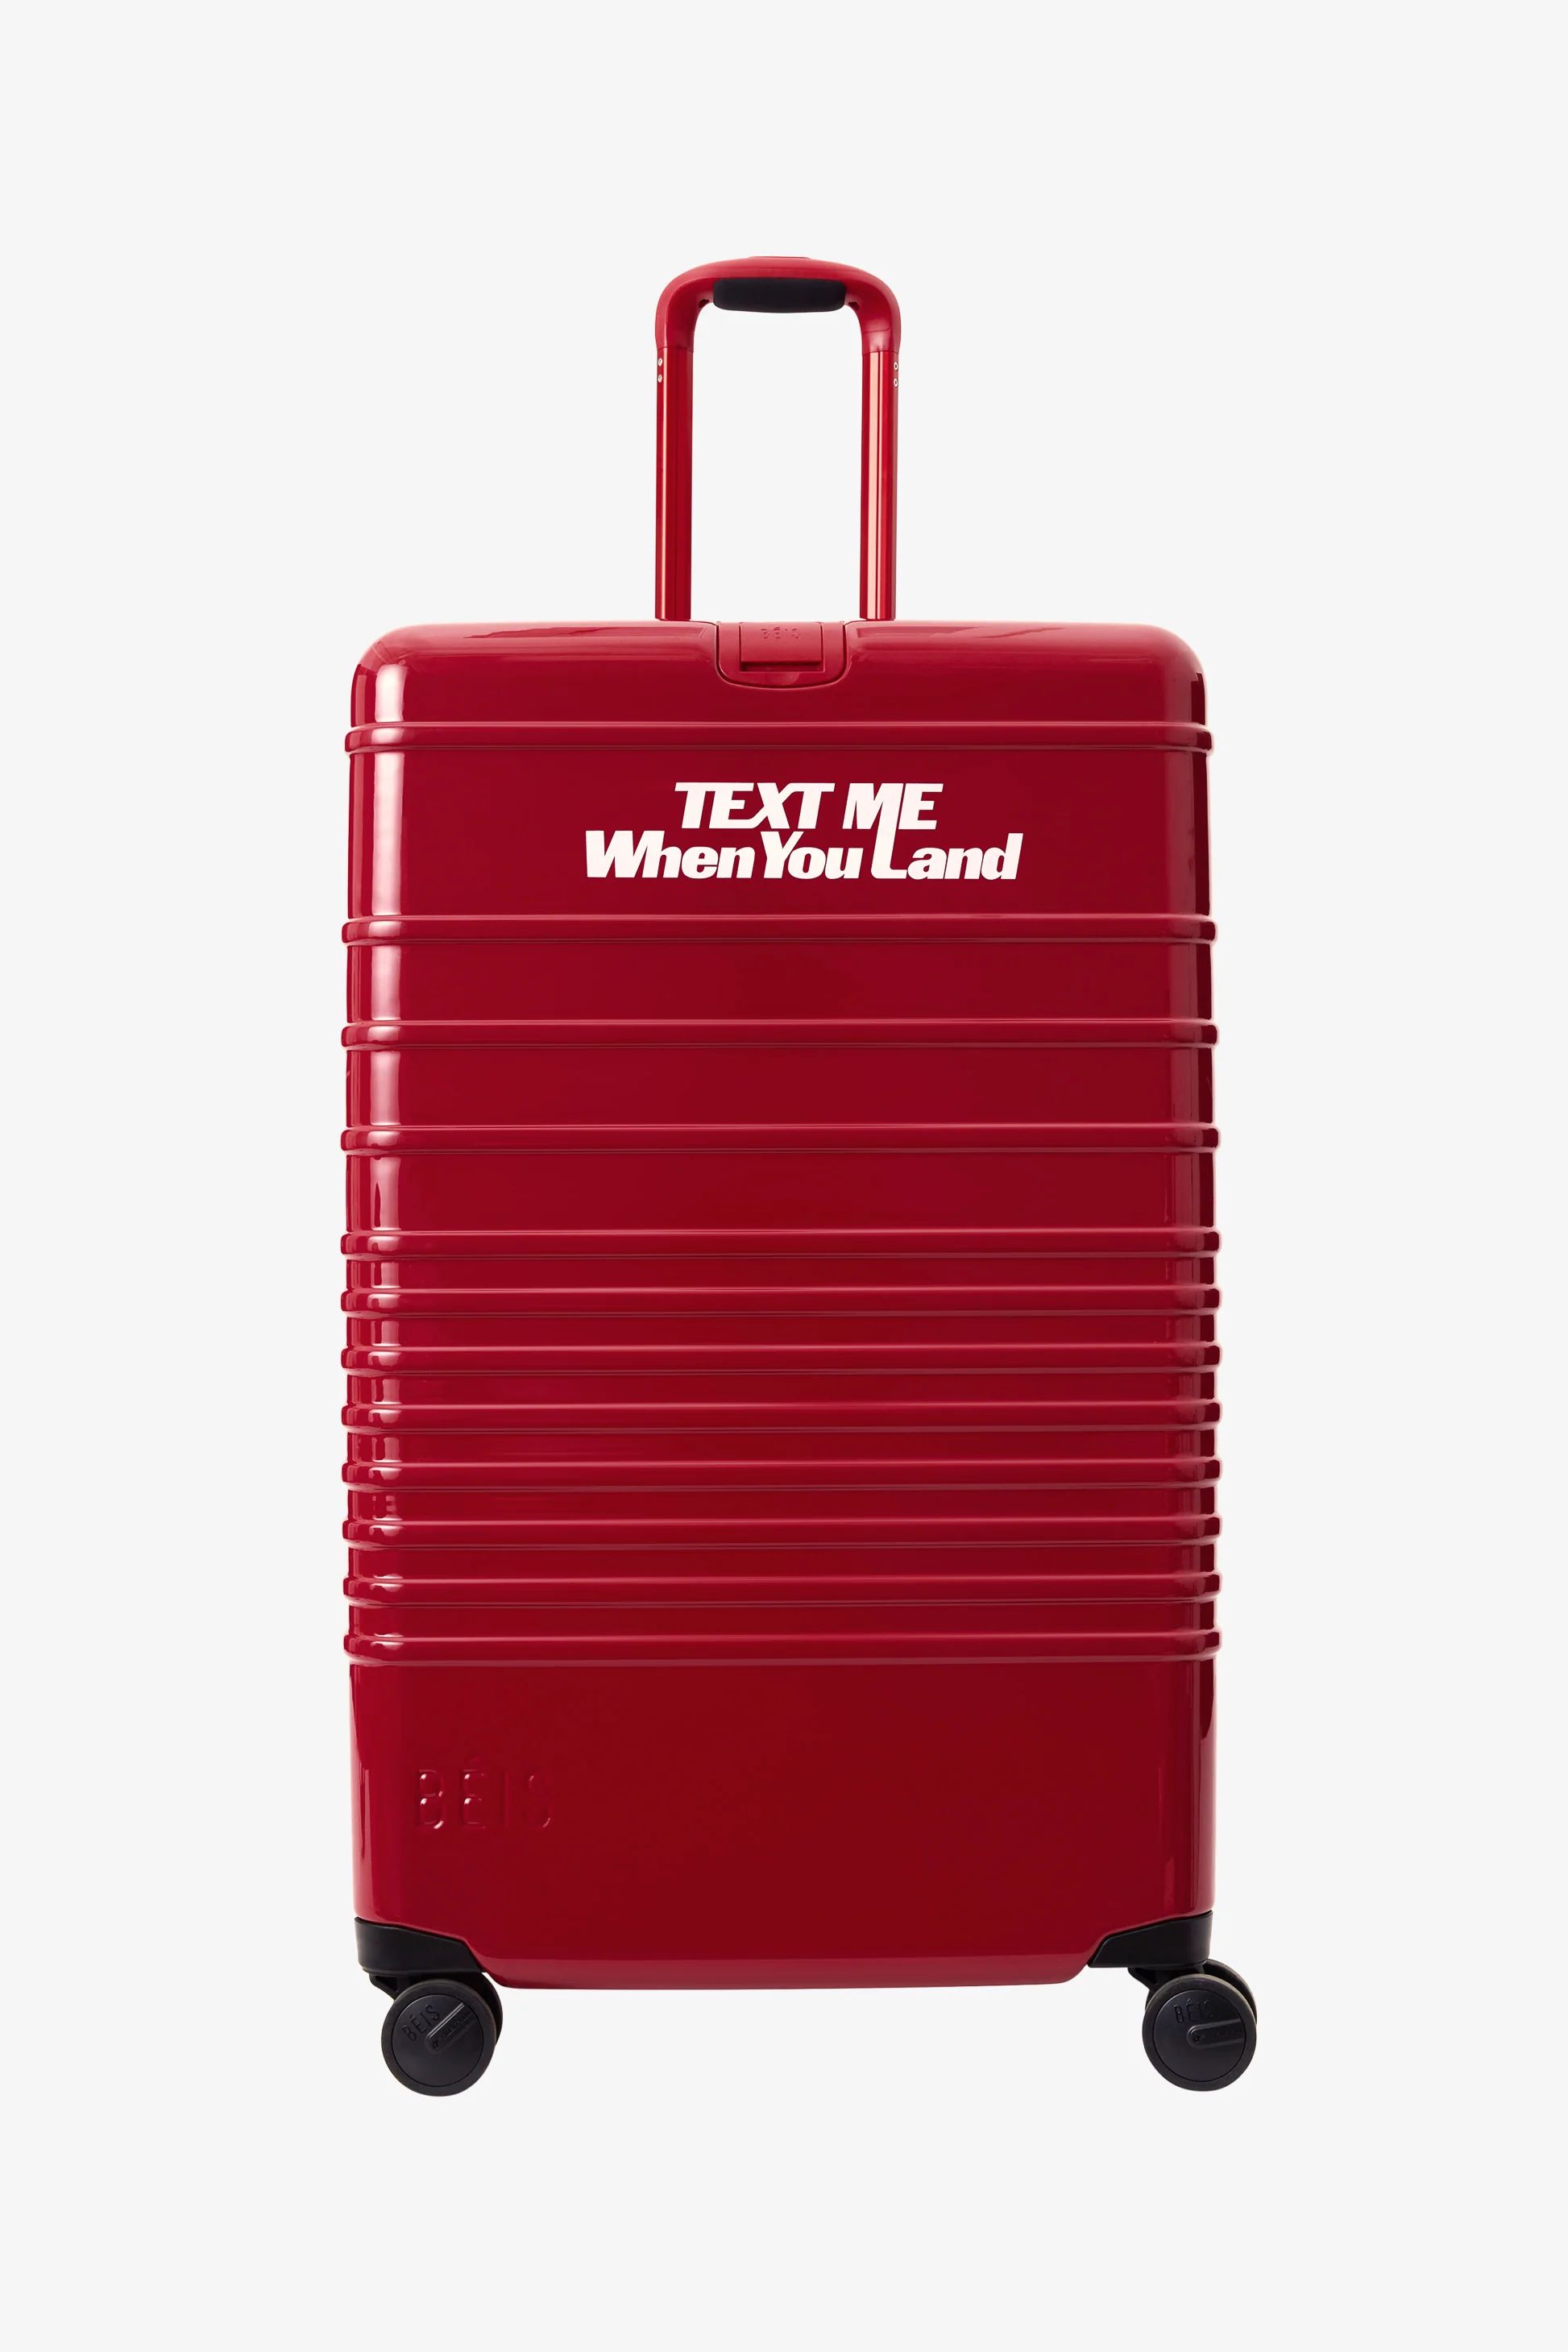 The Large Check-In Roller in Text Me Red | BÉIS Travel